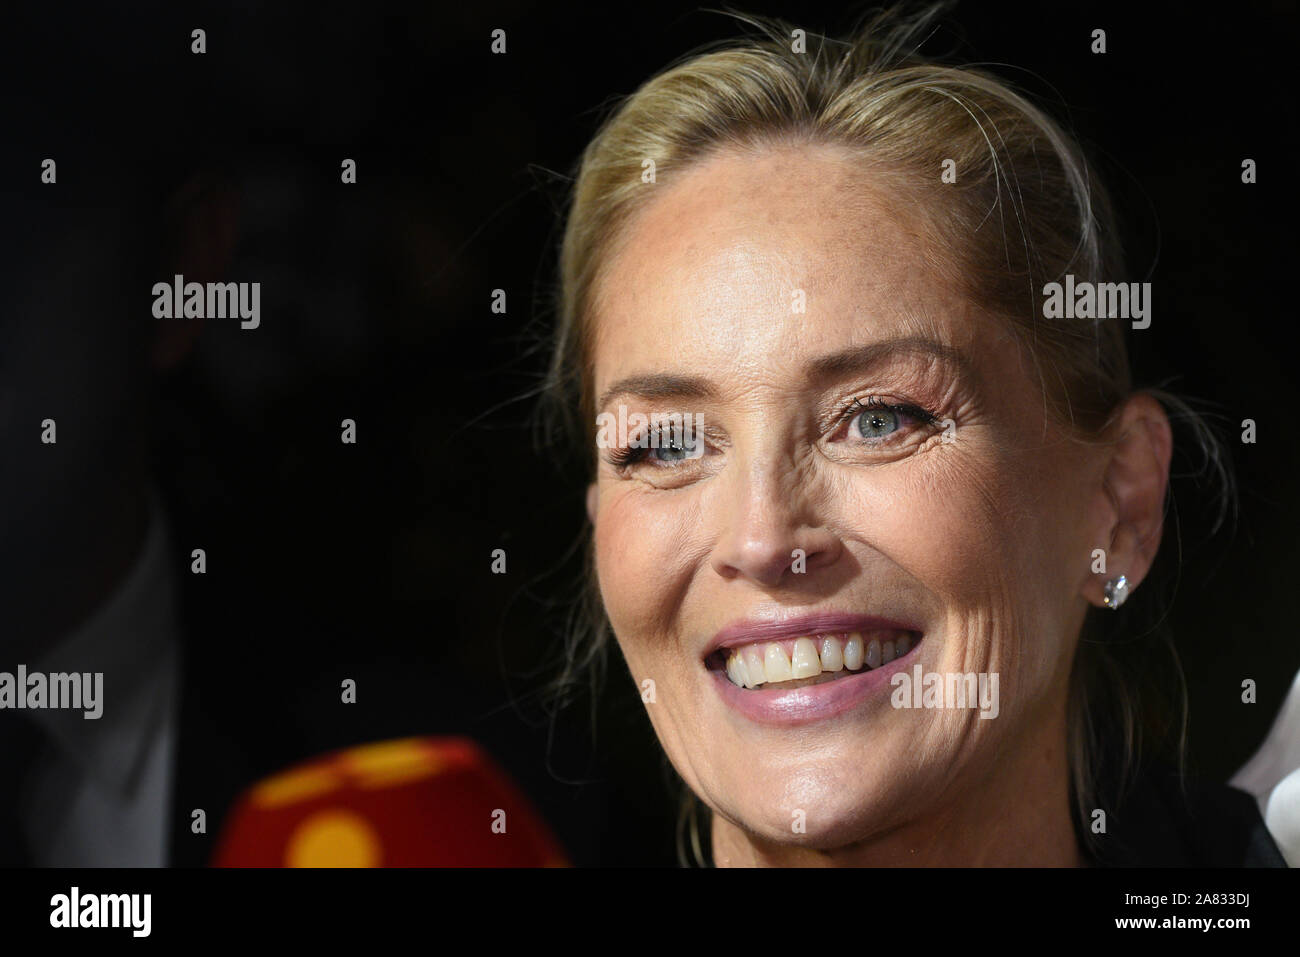 Madrid, Spain. 05th Nov, 2019. Sharon Stone attends the Harper's Bazaar Awards 2019 at Santoña palace in Madrid.The American actress, producer, and former fashion model Sharon Vonne Stone received the International Icon Harper's Bazaar Award 2019. Credit: SOPA Images Limited/Alamy Live News Stock Photo